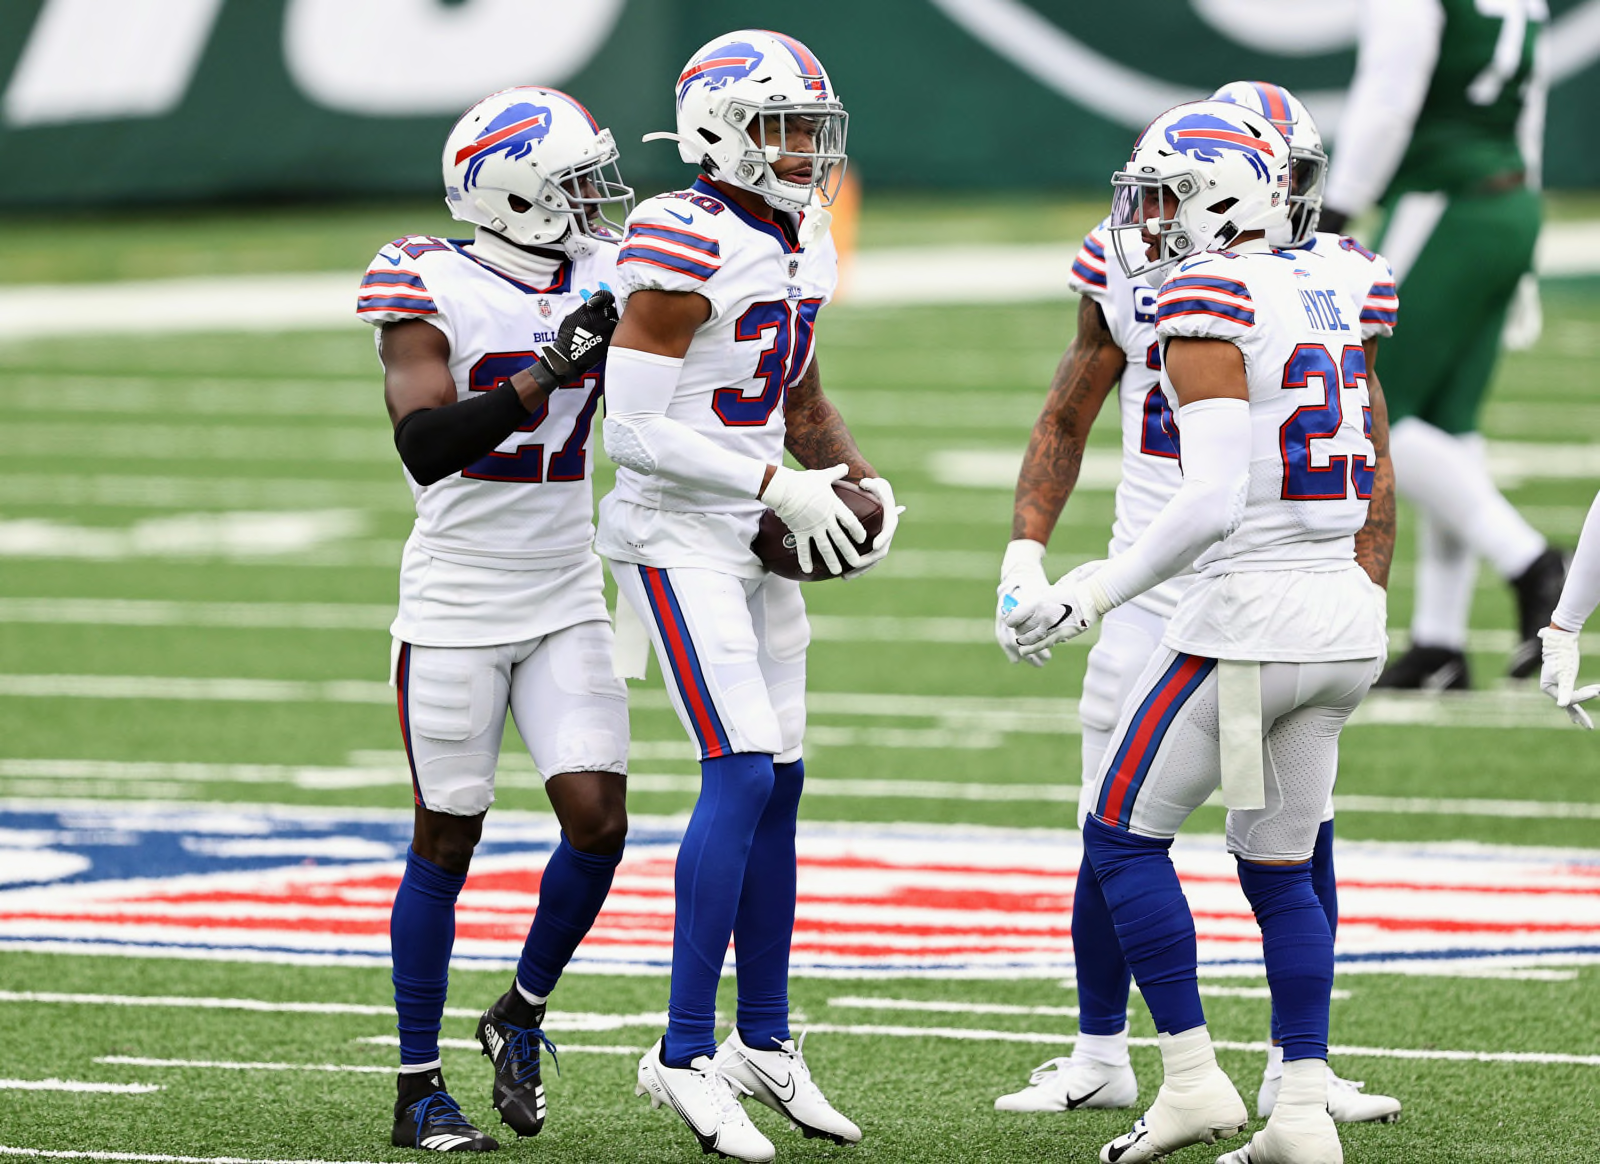 Fiasko Føderale ler Buffalo Bills: 4 future signings with best chance to make roster in 2021